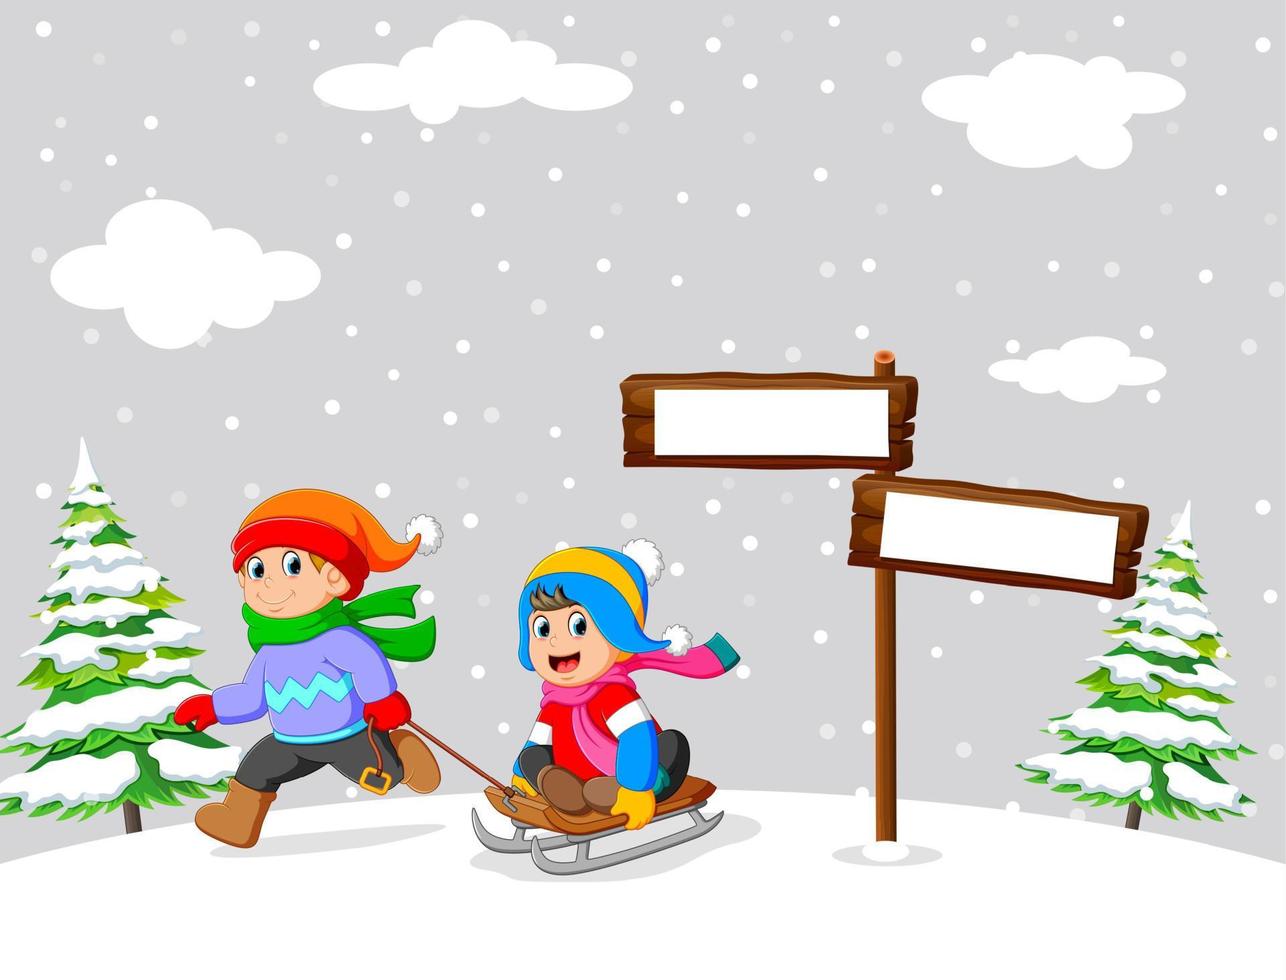 Kids playing a sleigh ride in winter vector